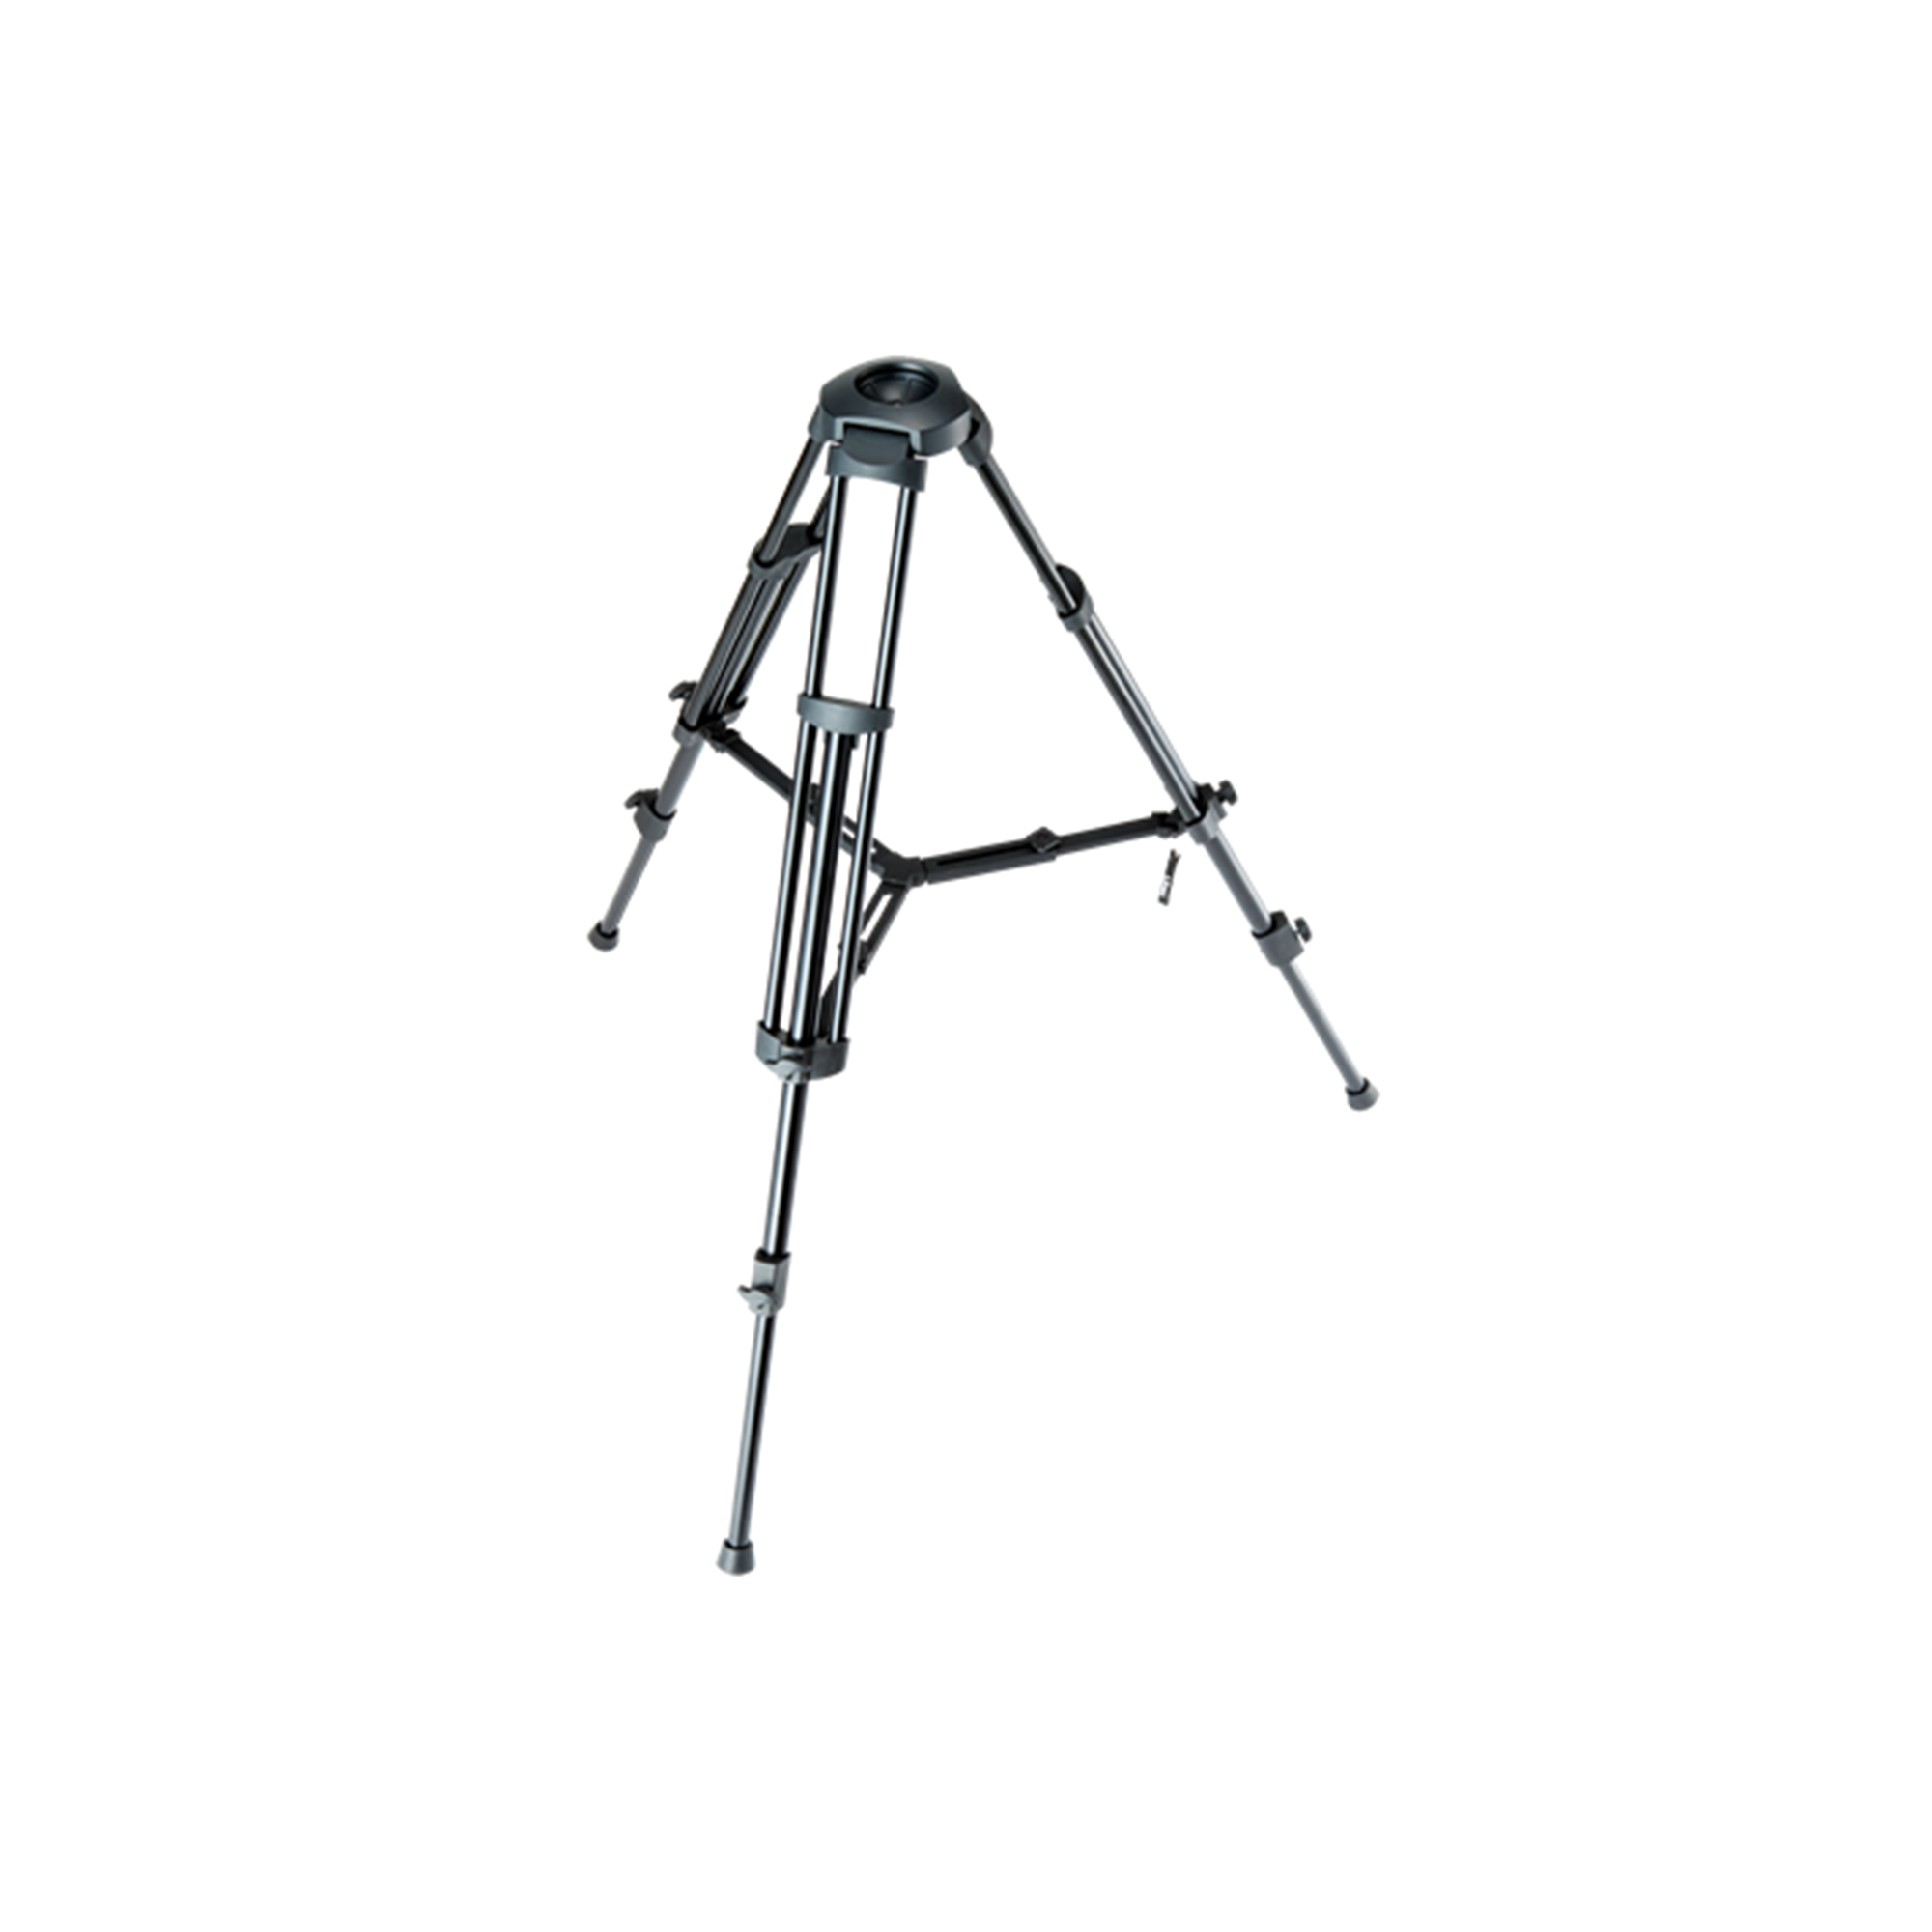 Libec 2stage tripod with 75mm bowl and extendable mid-level spreader